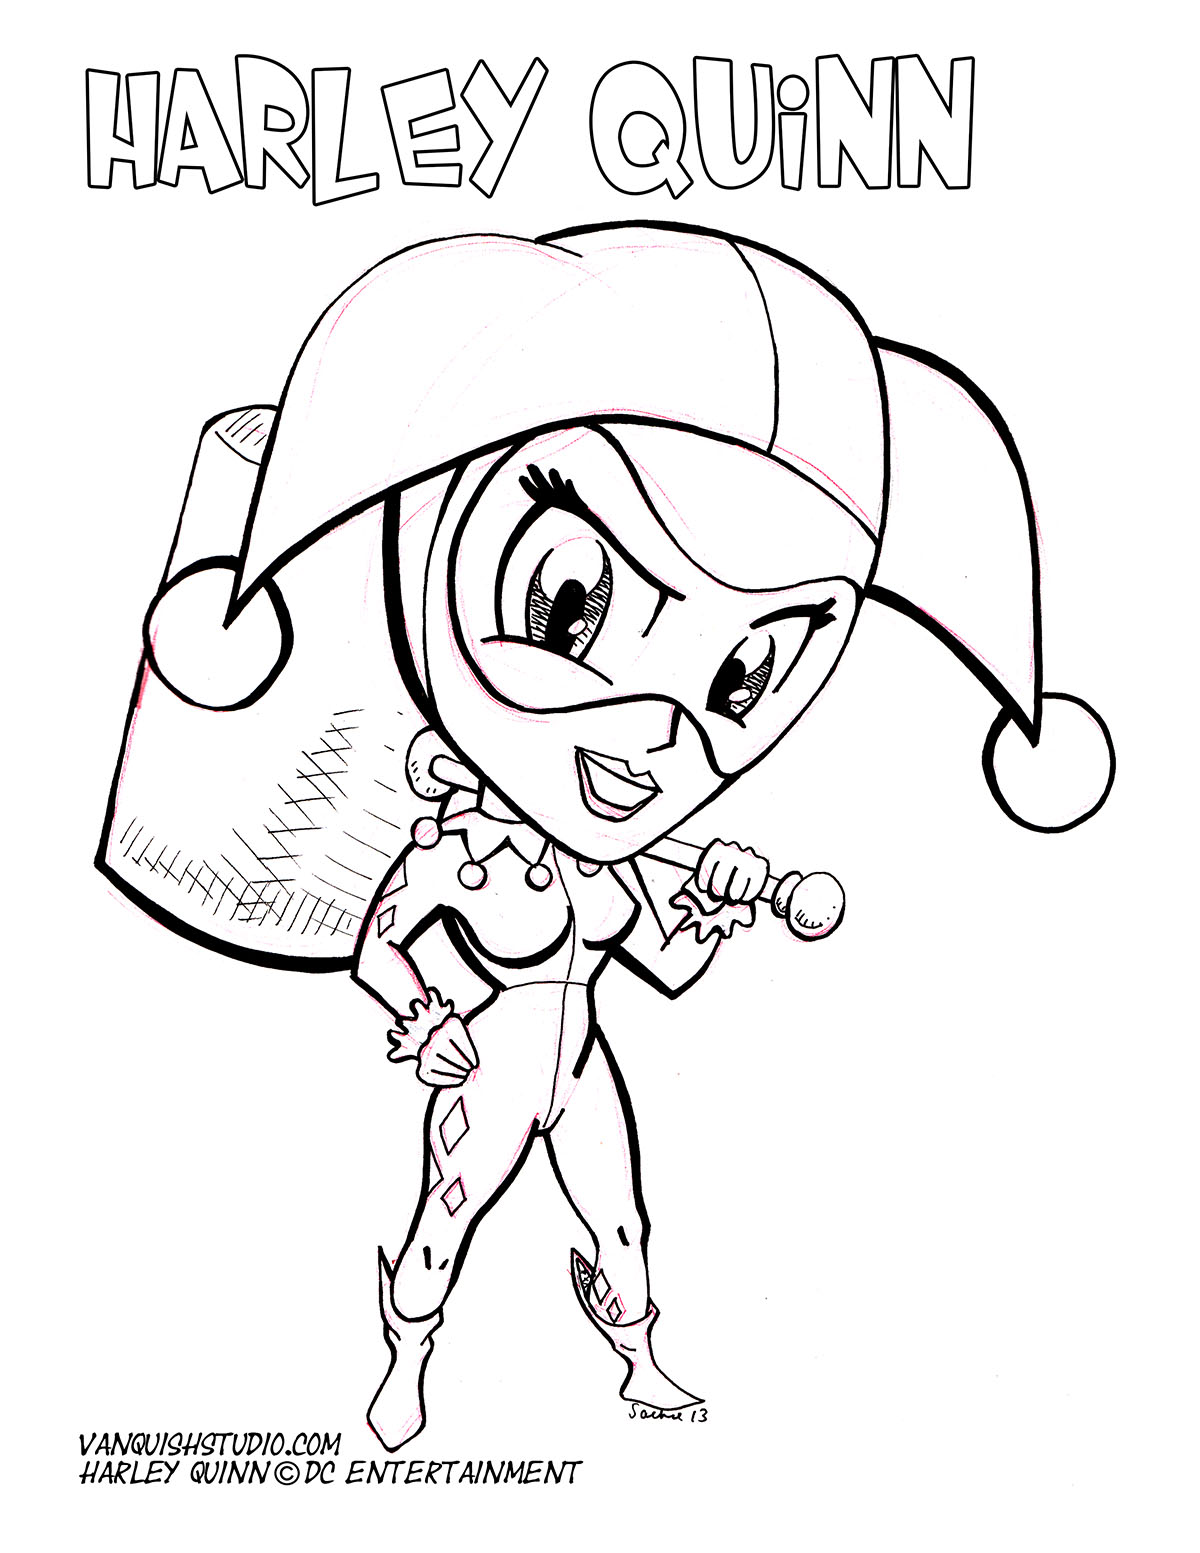 Coloring Pages : Harley Quinn Coloring Page Vanquish Studio ...